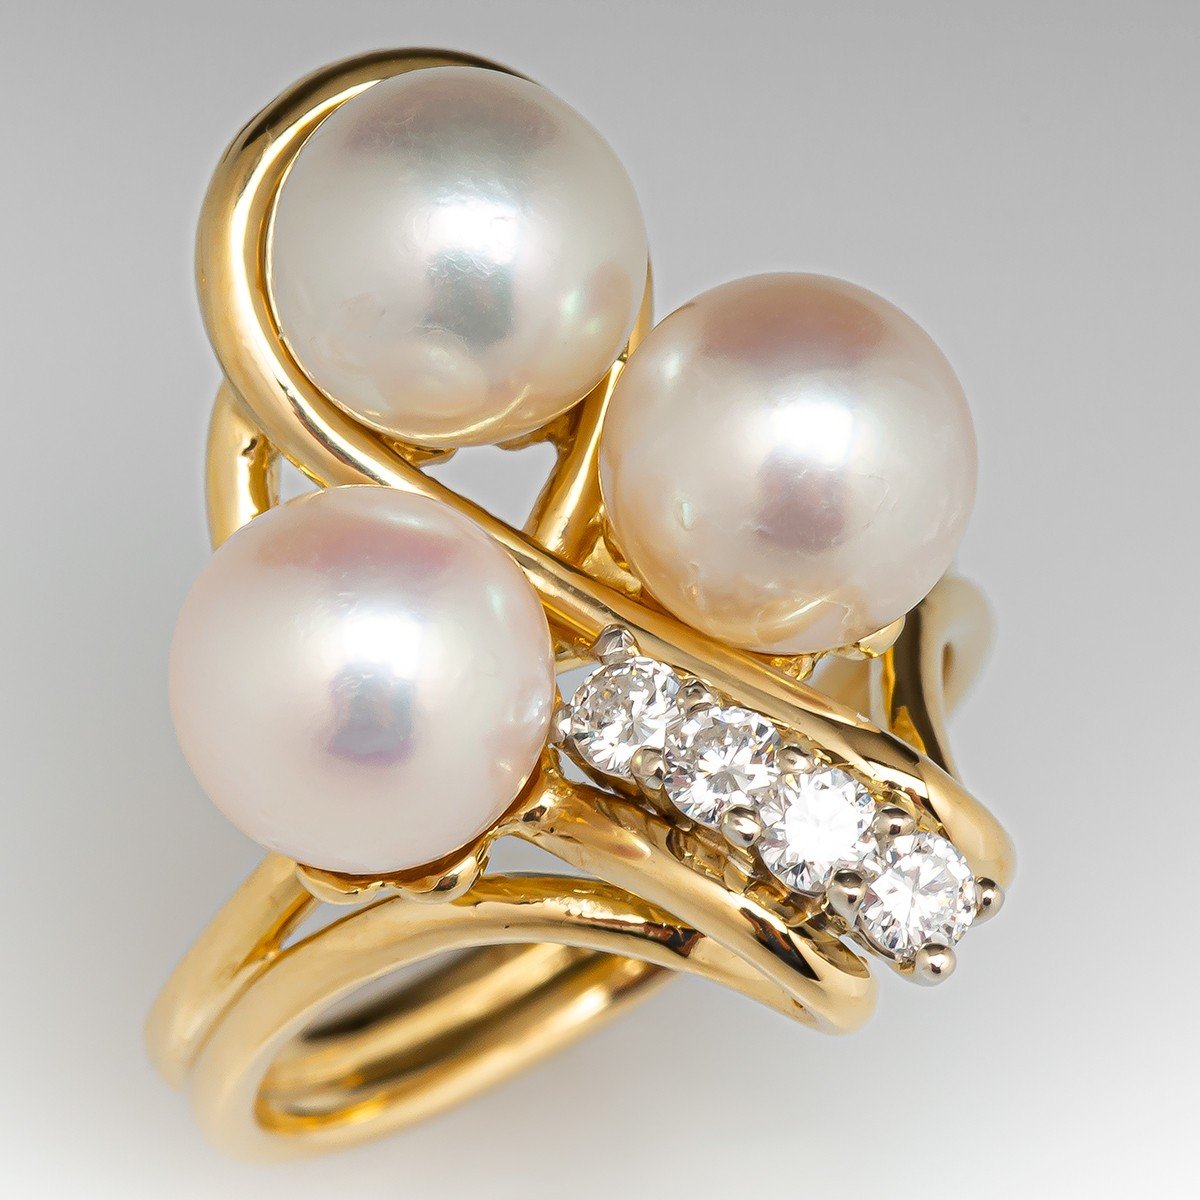 22K Gold Ring For Women with Pearl - 235-GR5992 in 3.550 Grams